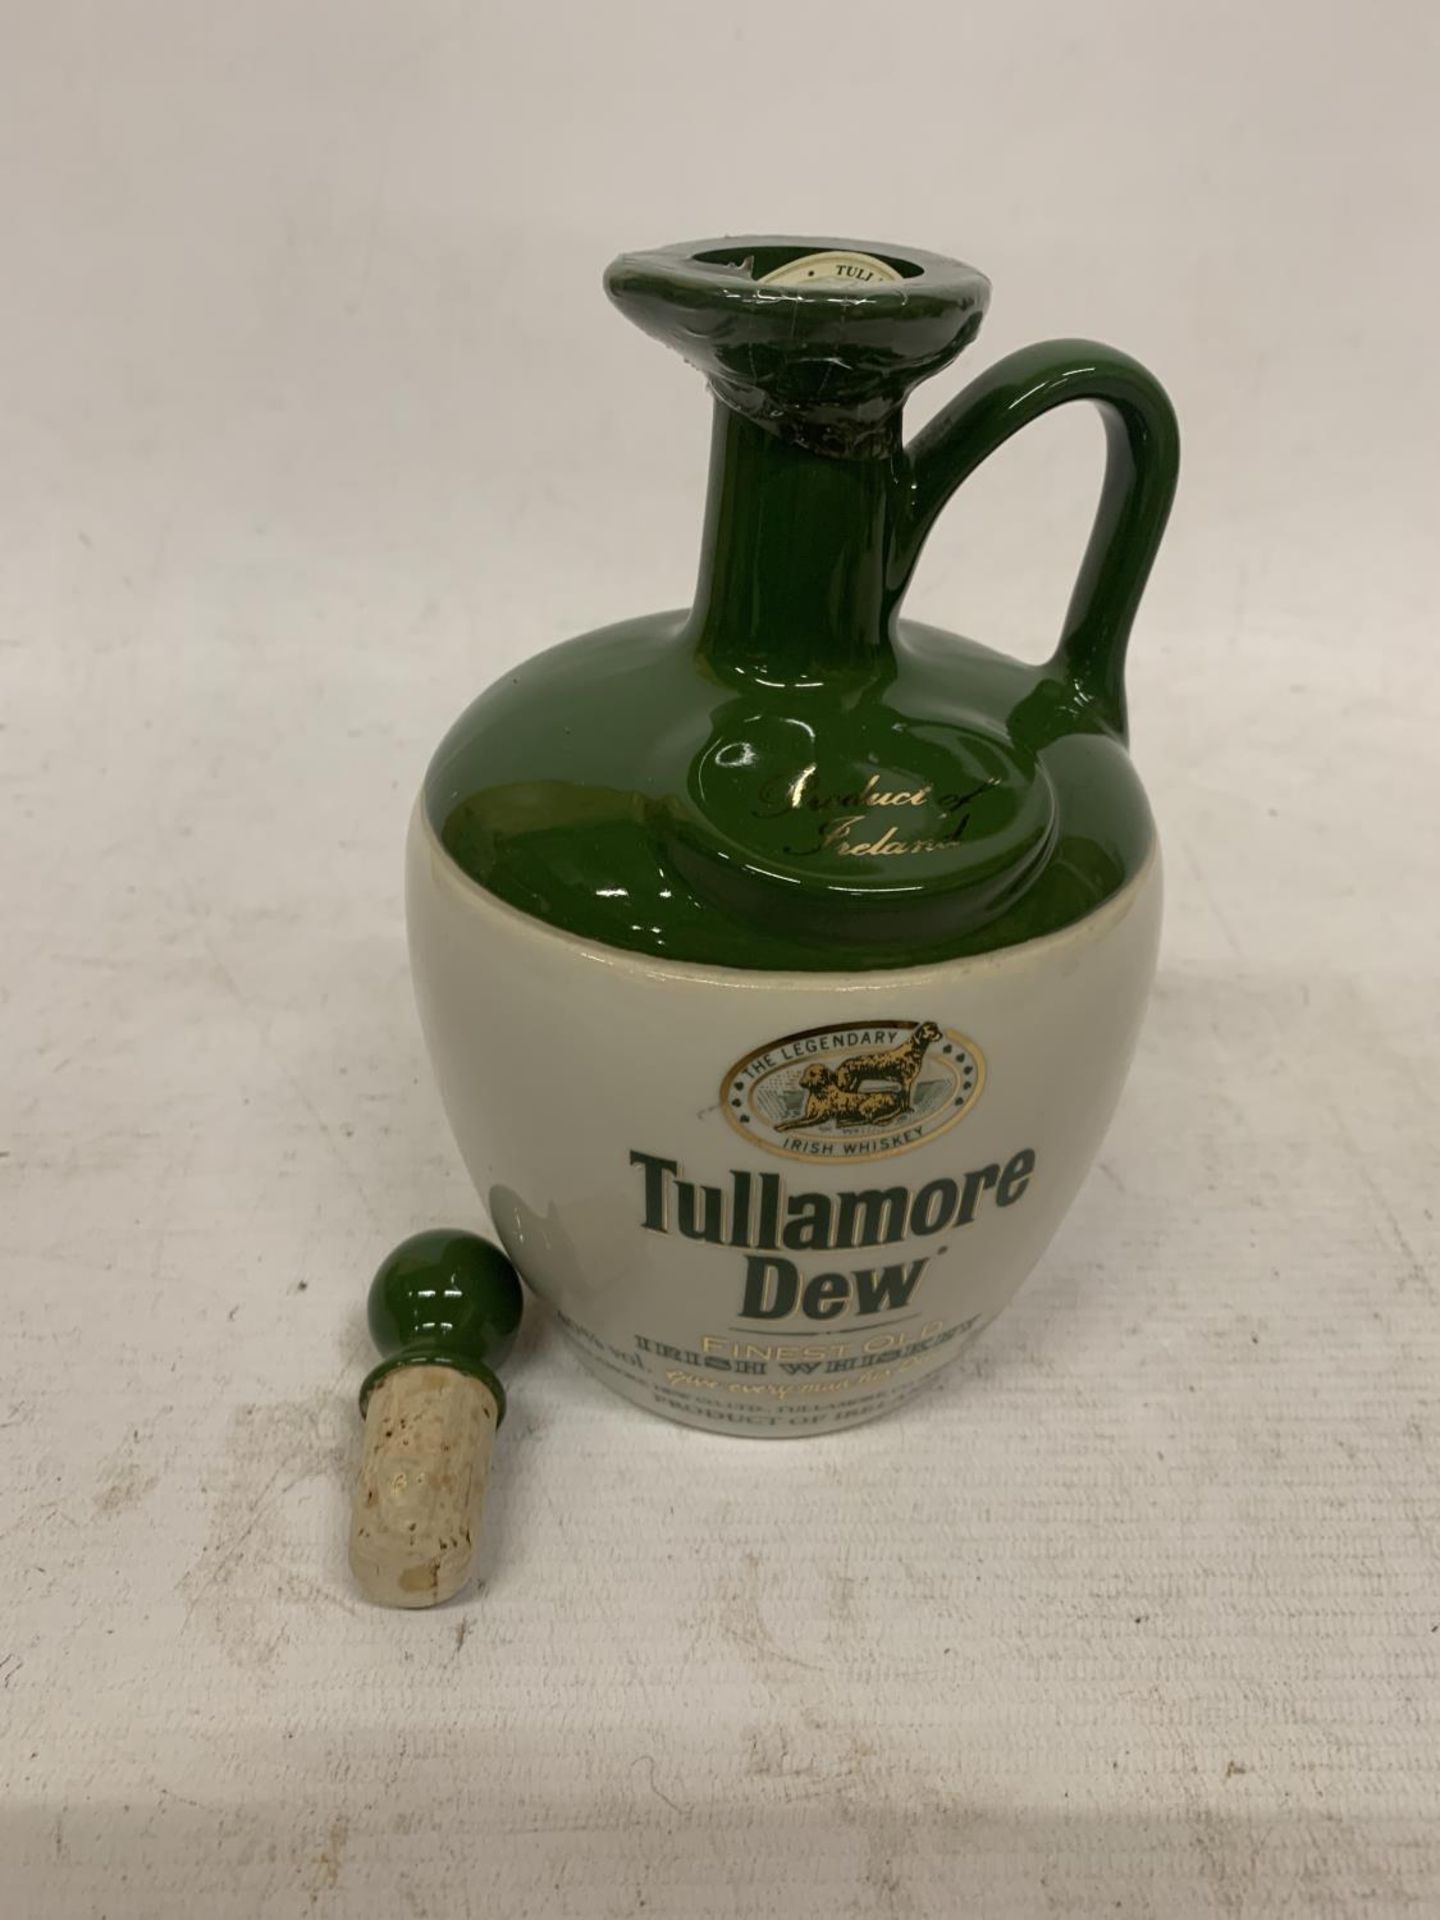 A TULLAMORE DEW FINEST OLD IRISH WHISKEY IN A CERAMIC JUG, 700ML, BOXED